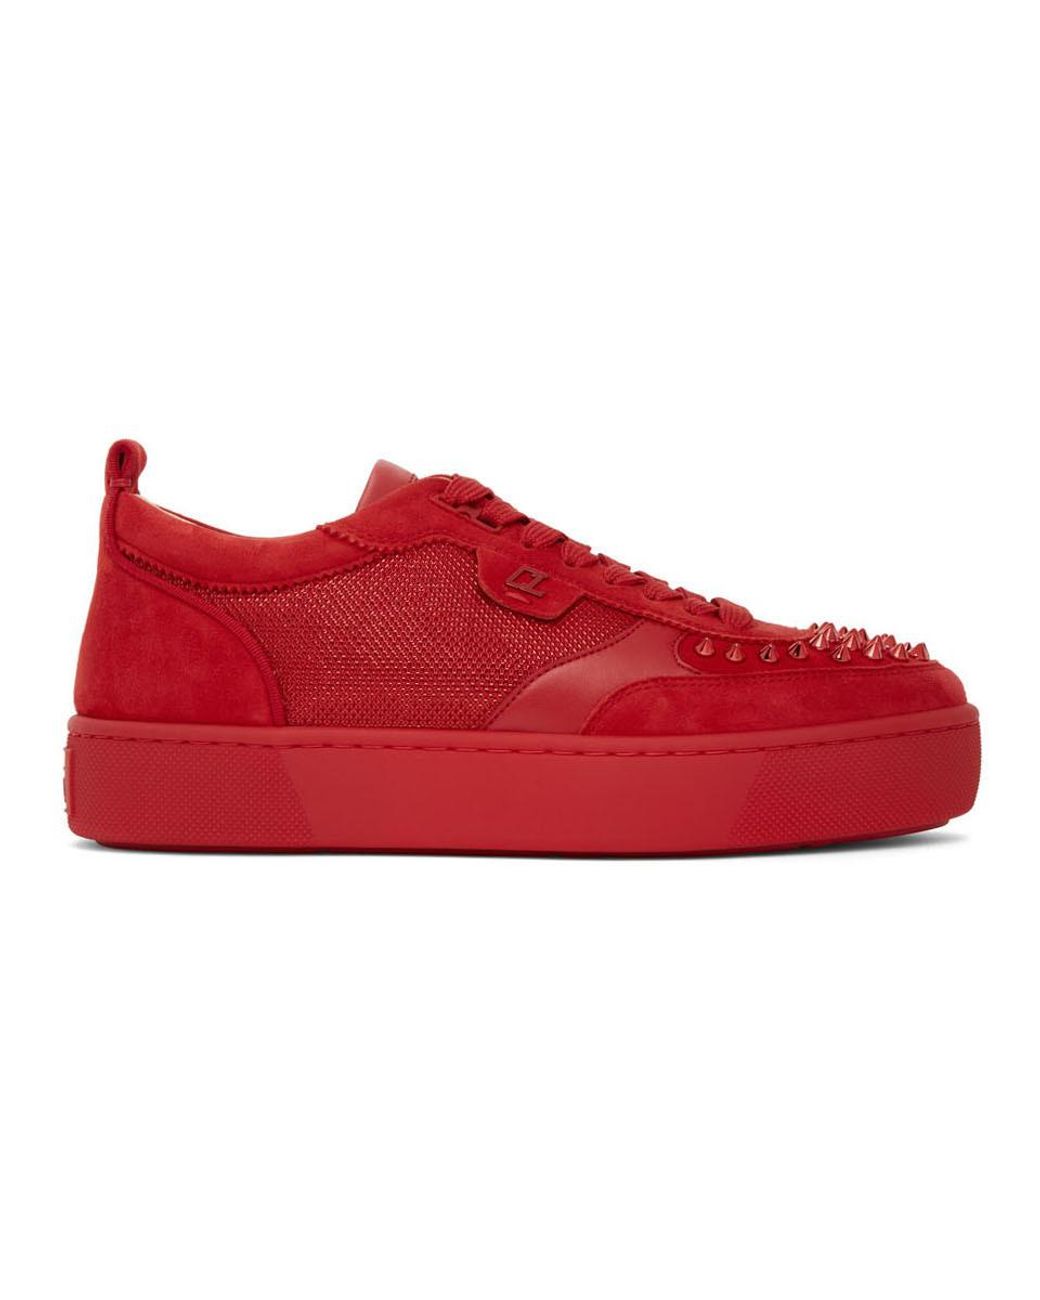 Christian Louboutin Suede Happy Rui Spikes Mixed-media Sneakers in Red ...